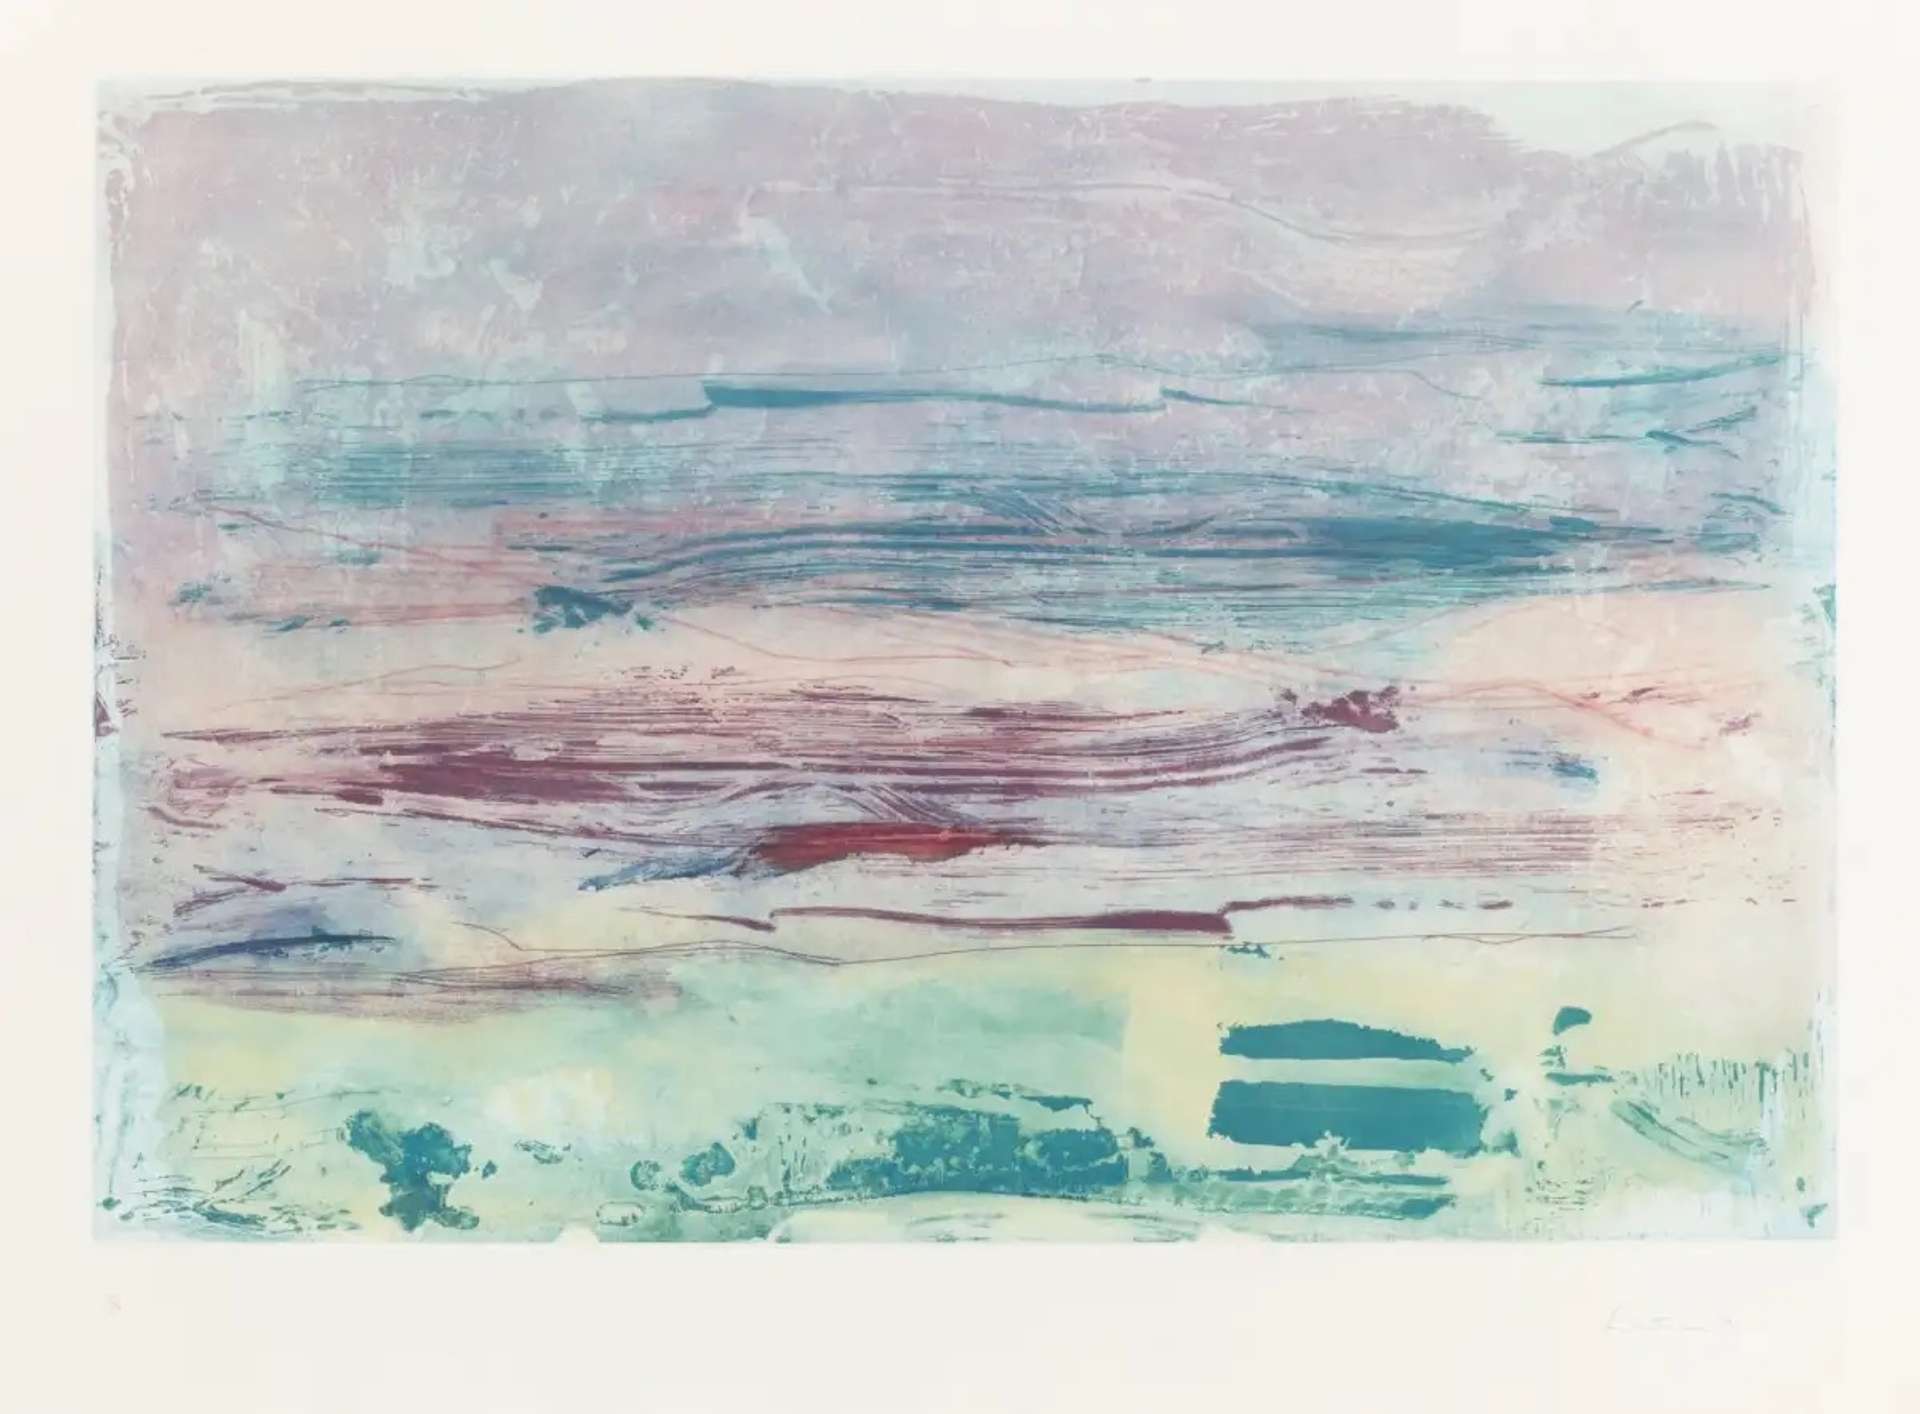 Helen Frankenthaler’s Sure Viollet. An abstract expressionist intaglio print of a mountain-like landscape.